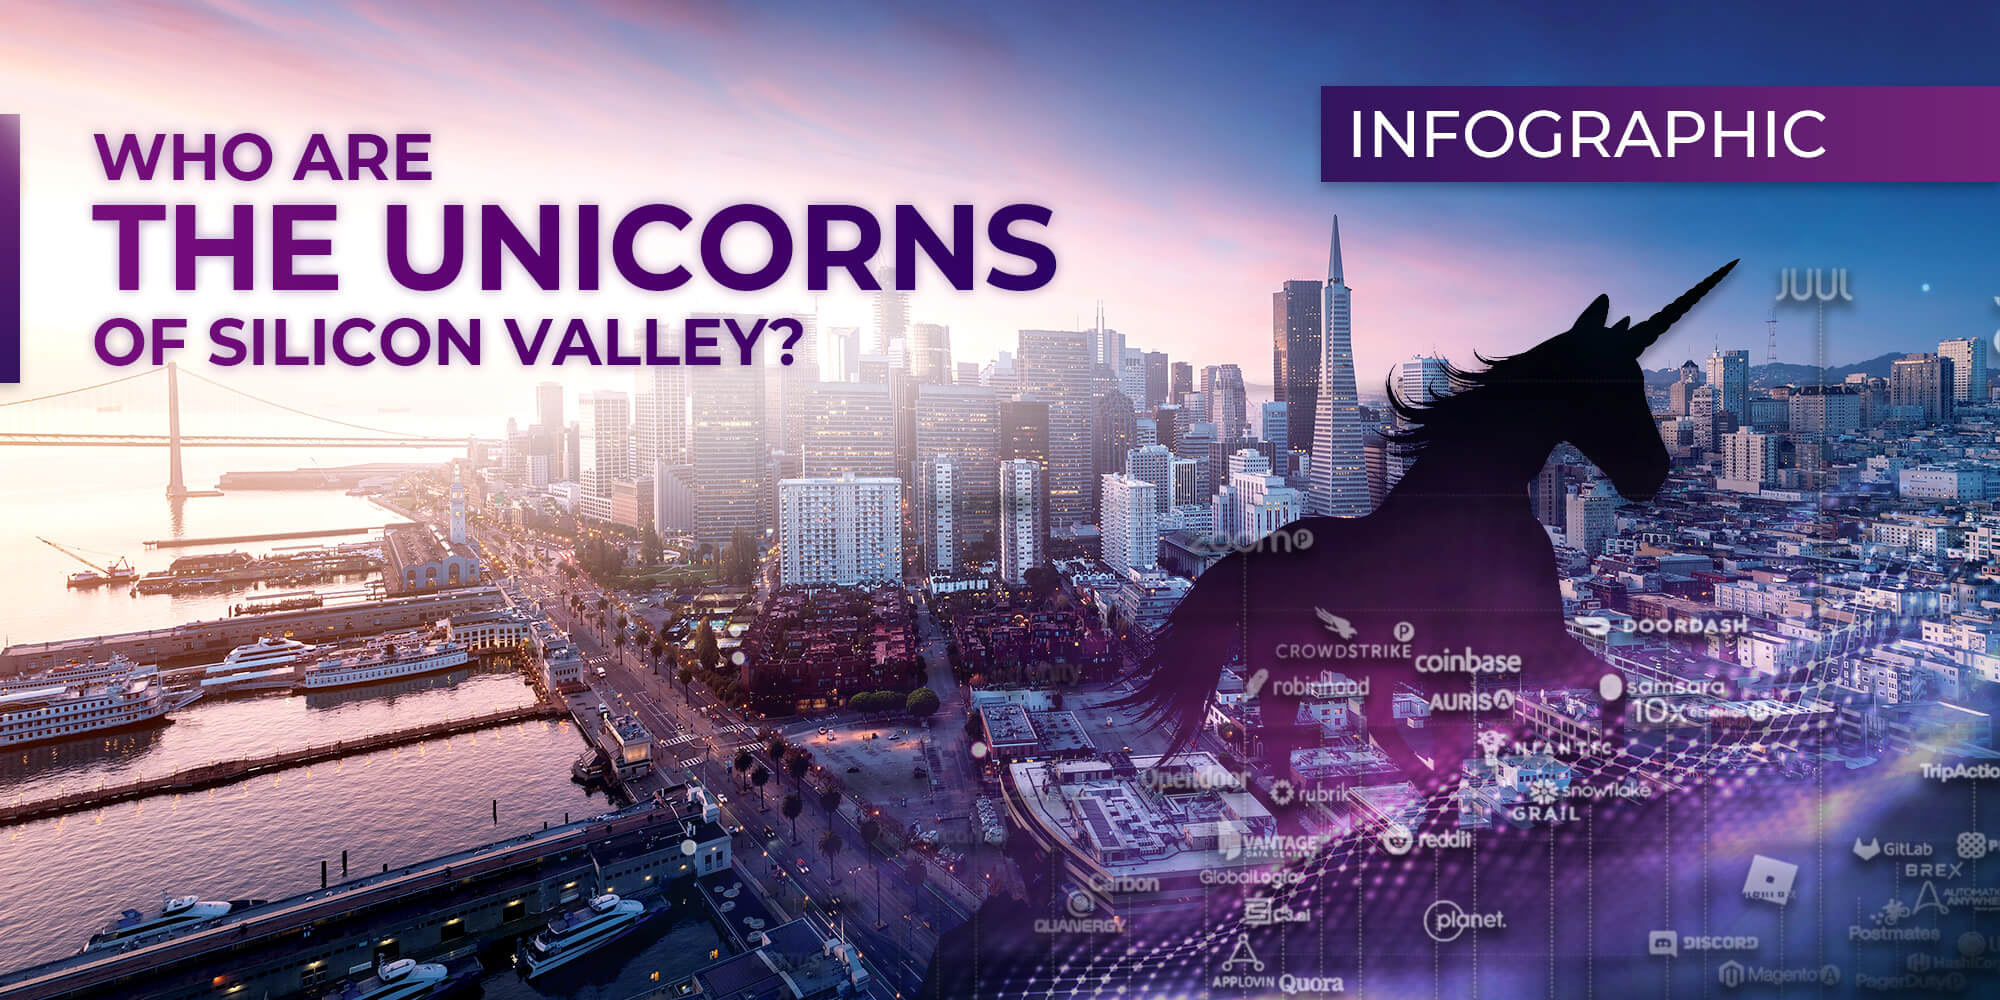 Infographic: Who are the Unicorns of Silicon Valley?